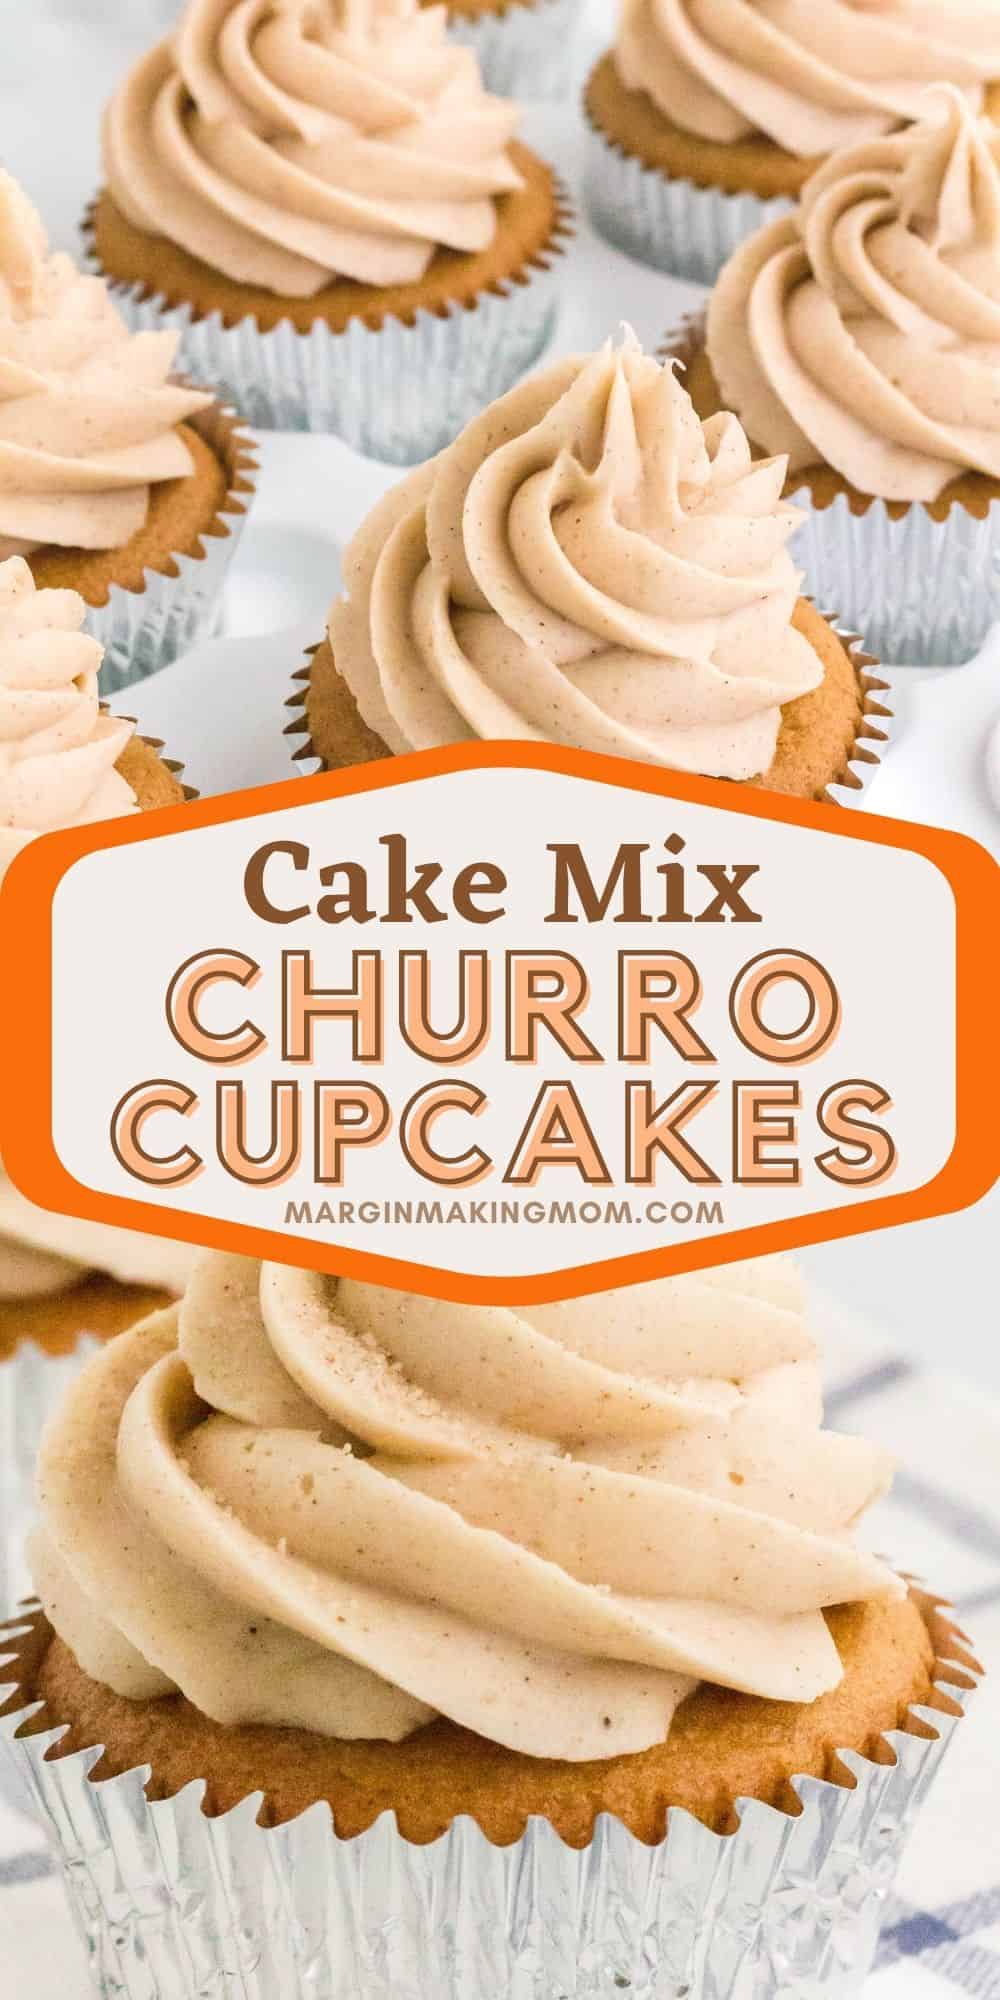 collage image with two photos of churro cupcakes; one is a close-up image of one cupcake and the other is an image of a few cupcakes